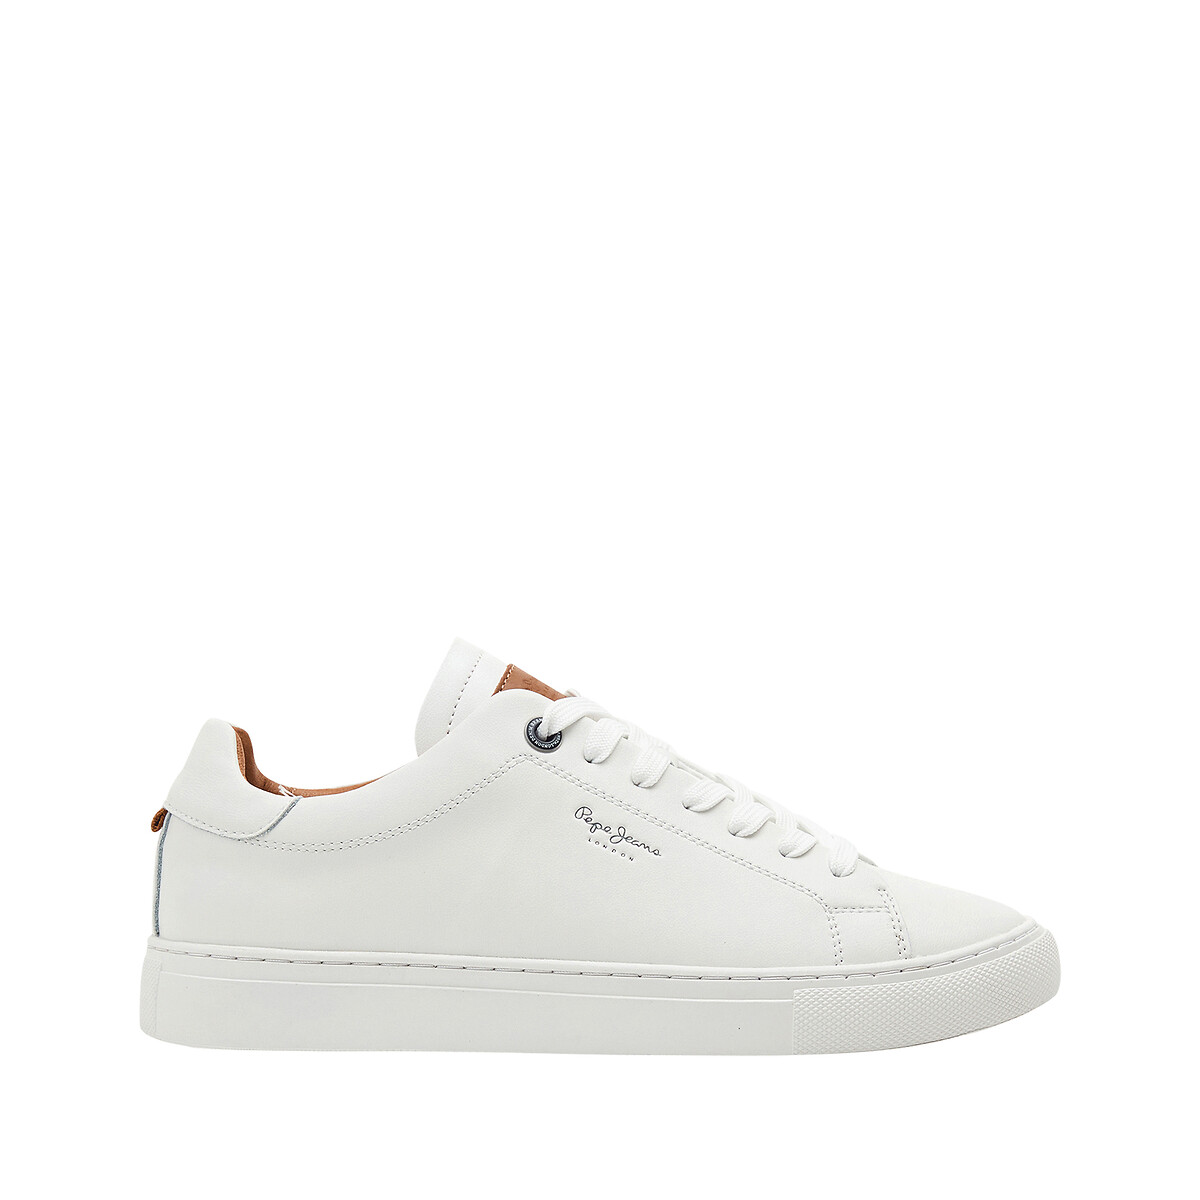 Joe cup one trainers in leather, white, Pepe Jeans | La Redoute